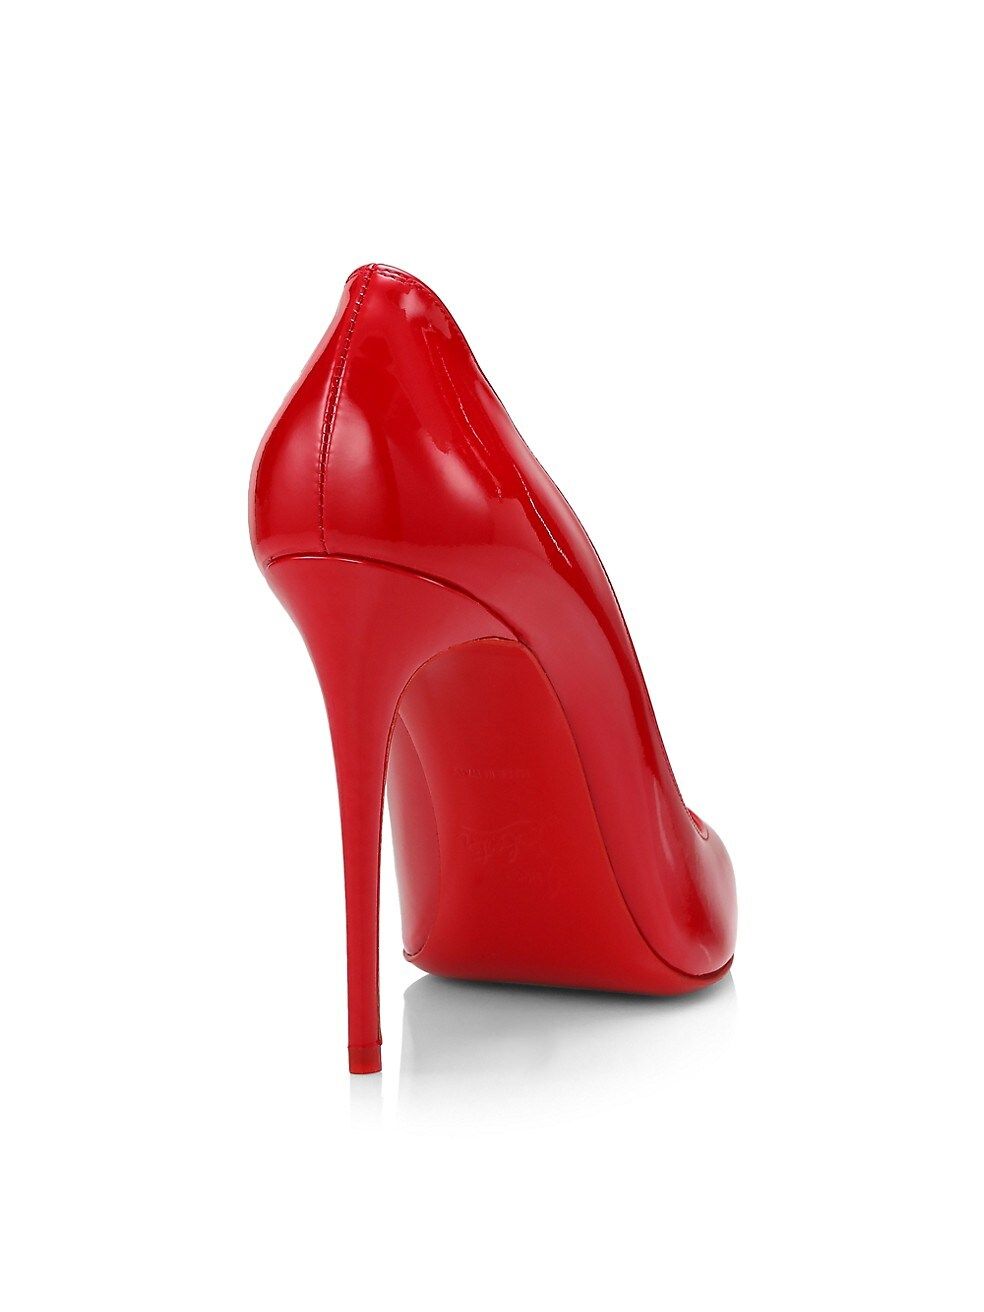 Kate 100 Patent Leather Pumps | Saks Fifth Avenue